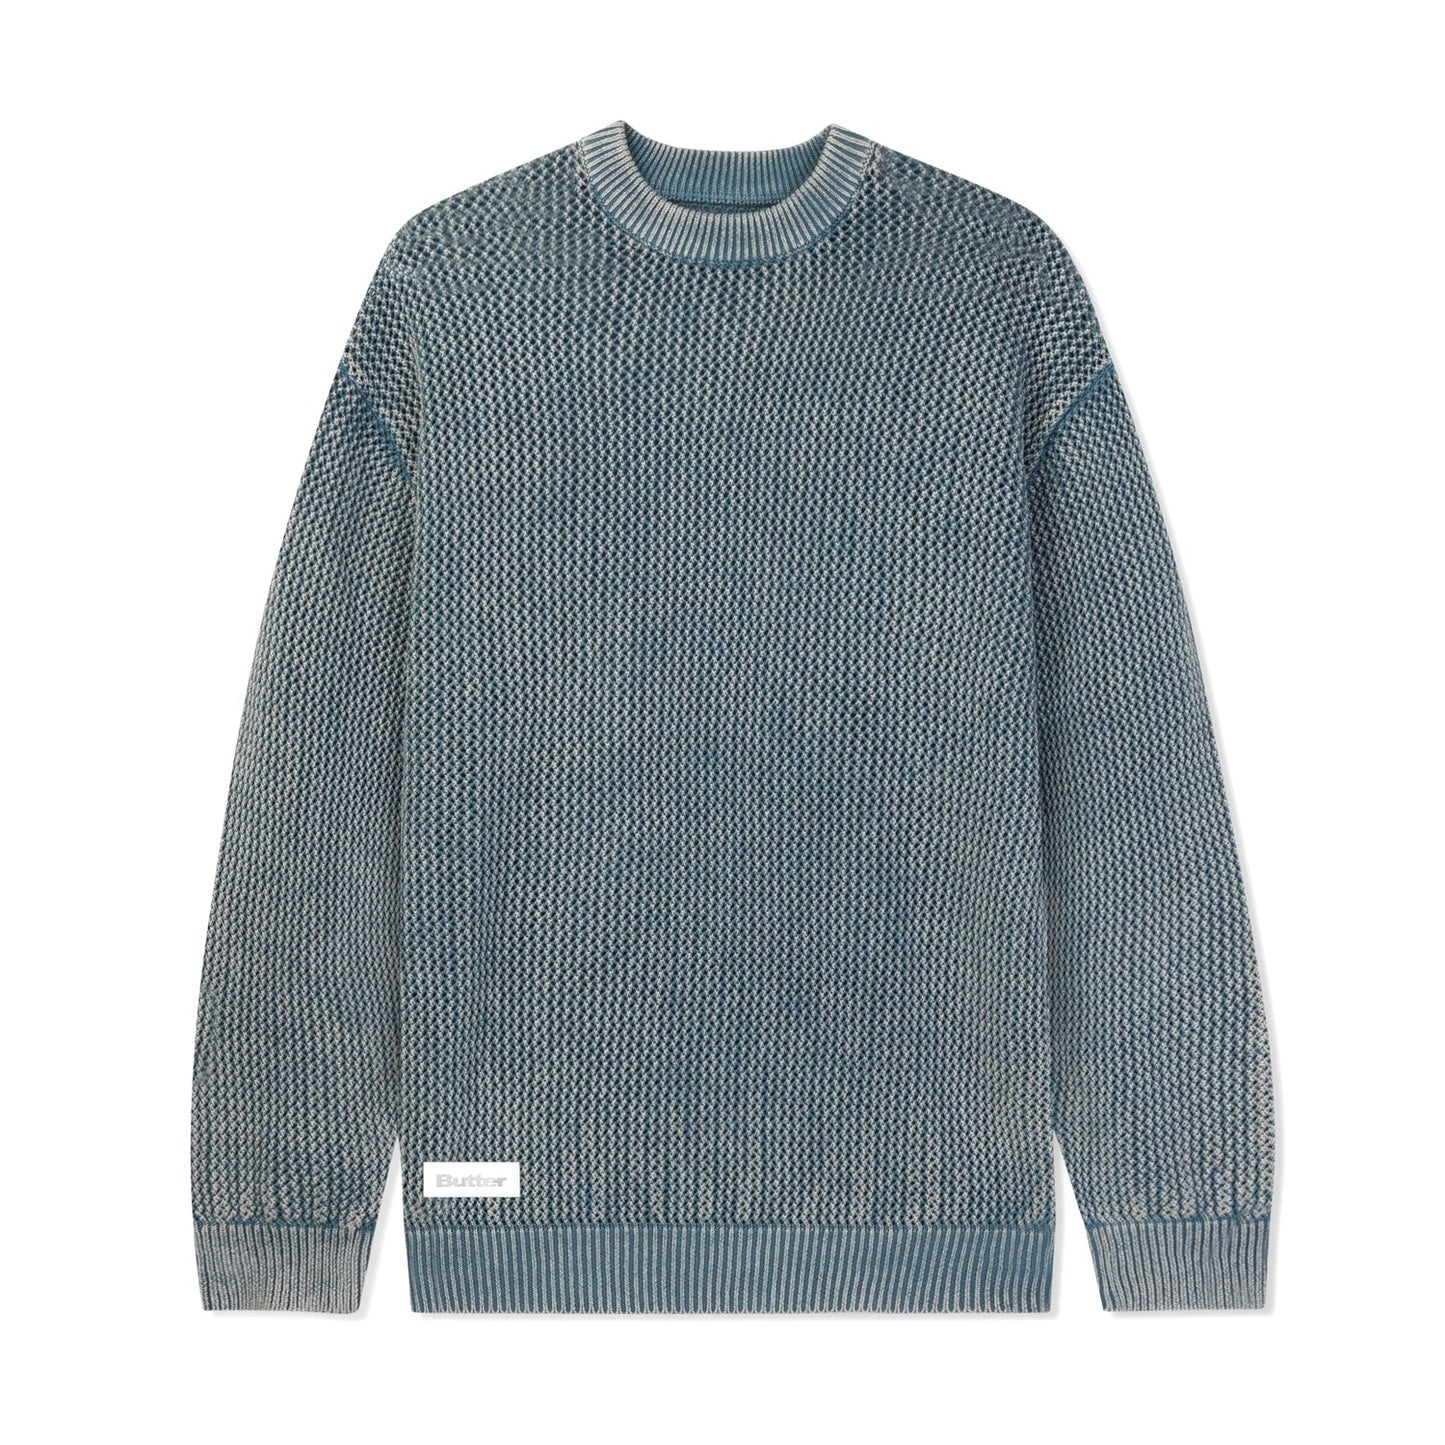 Washed Knitted Sweater - Washed Navy